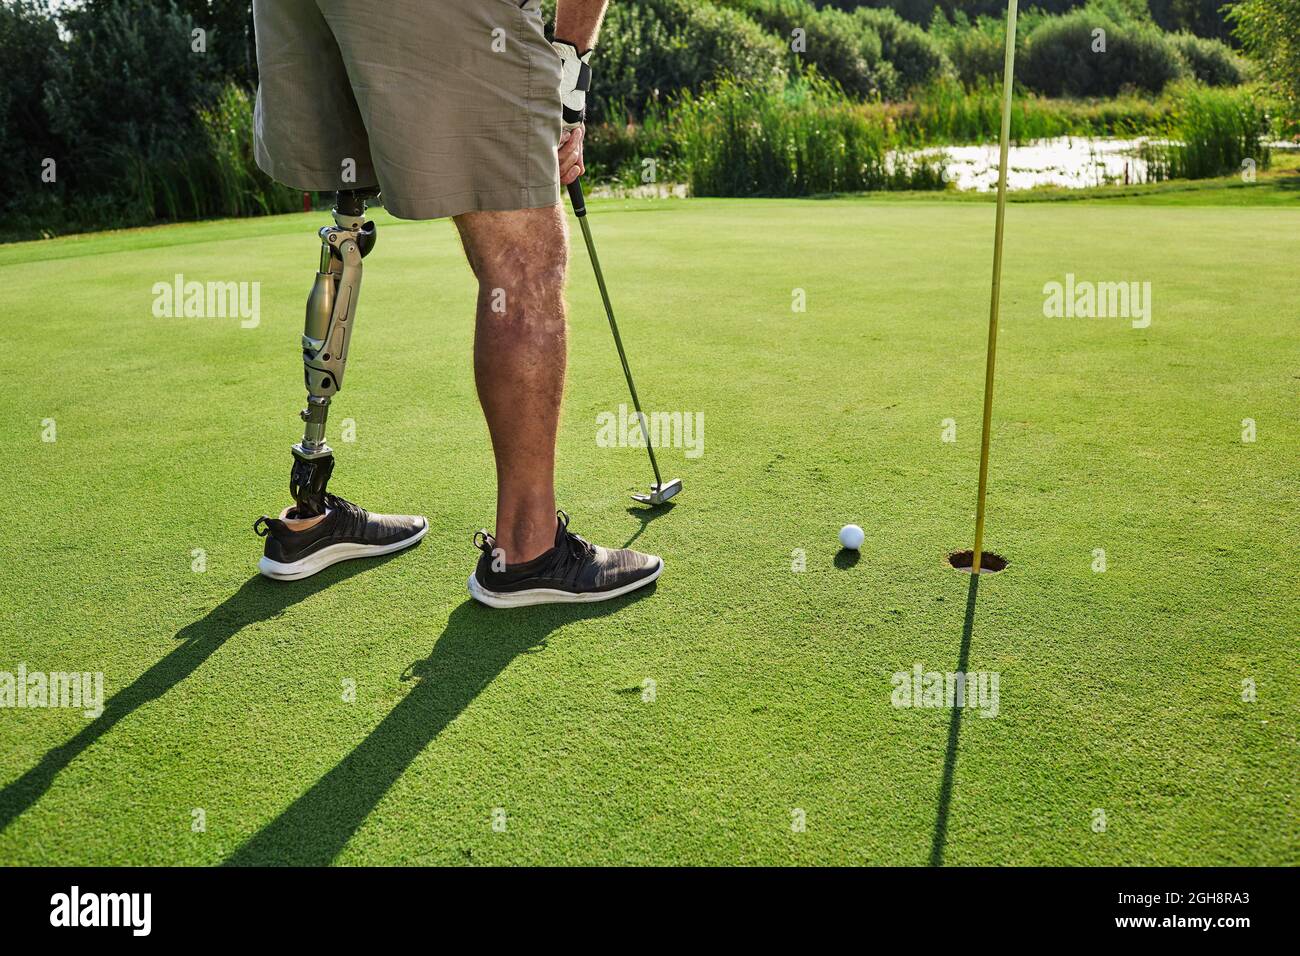 Professional golfer with prosthetic leg hitting with putter on golf ball during golfing at sunny day with long shadows Stock Photo